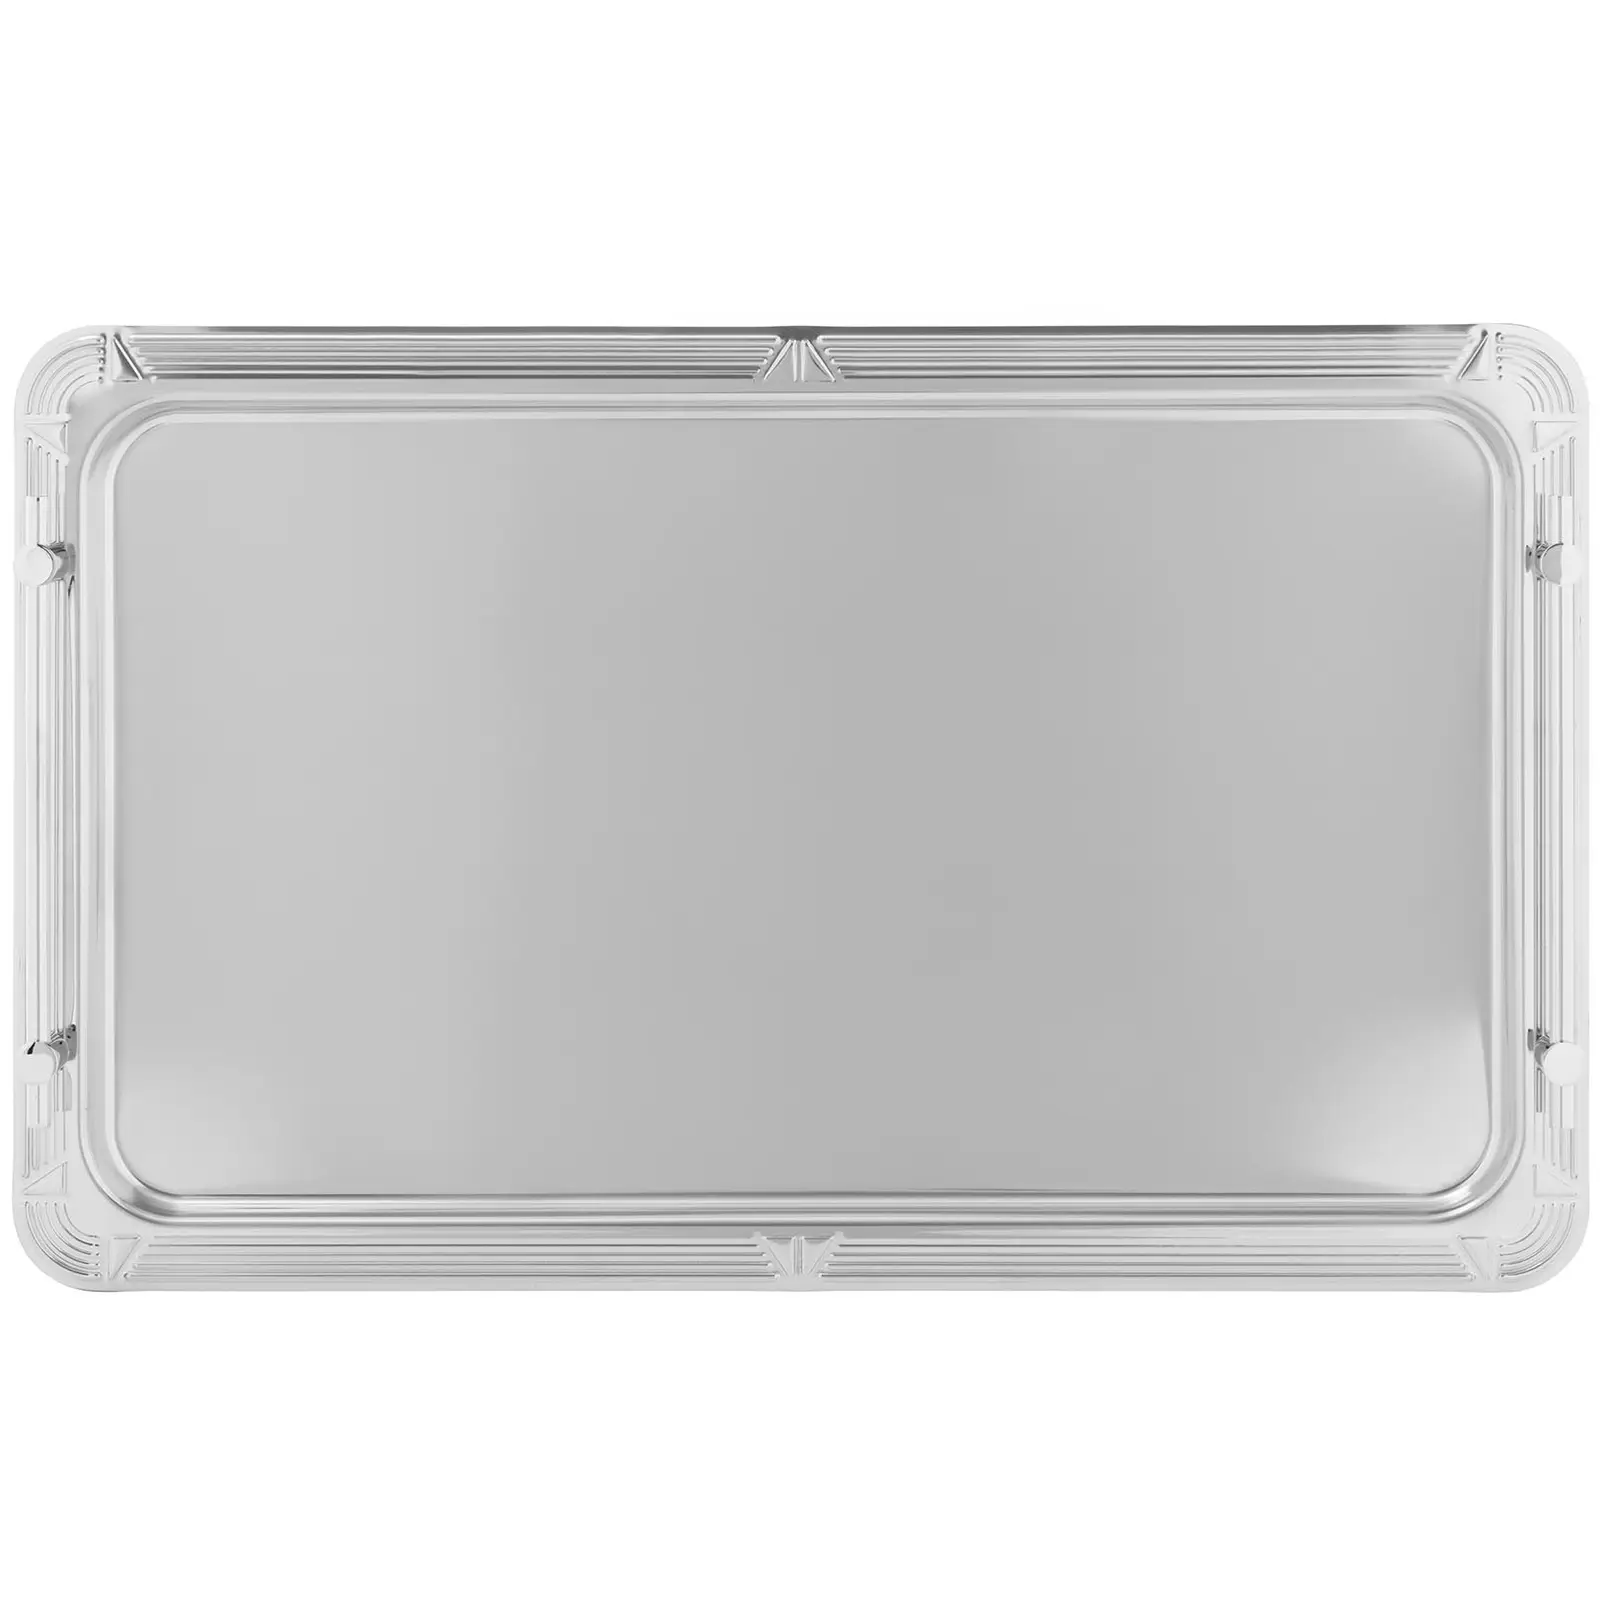 Bandeja - GN 1/1 - acero inoxidable - Royal Catering - 530 x 325 x 40 mm